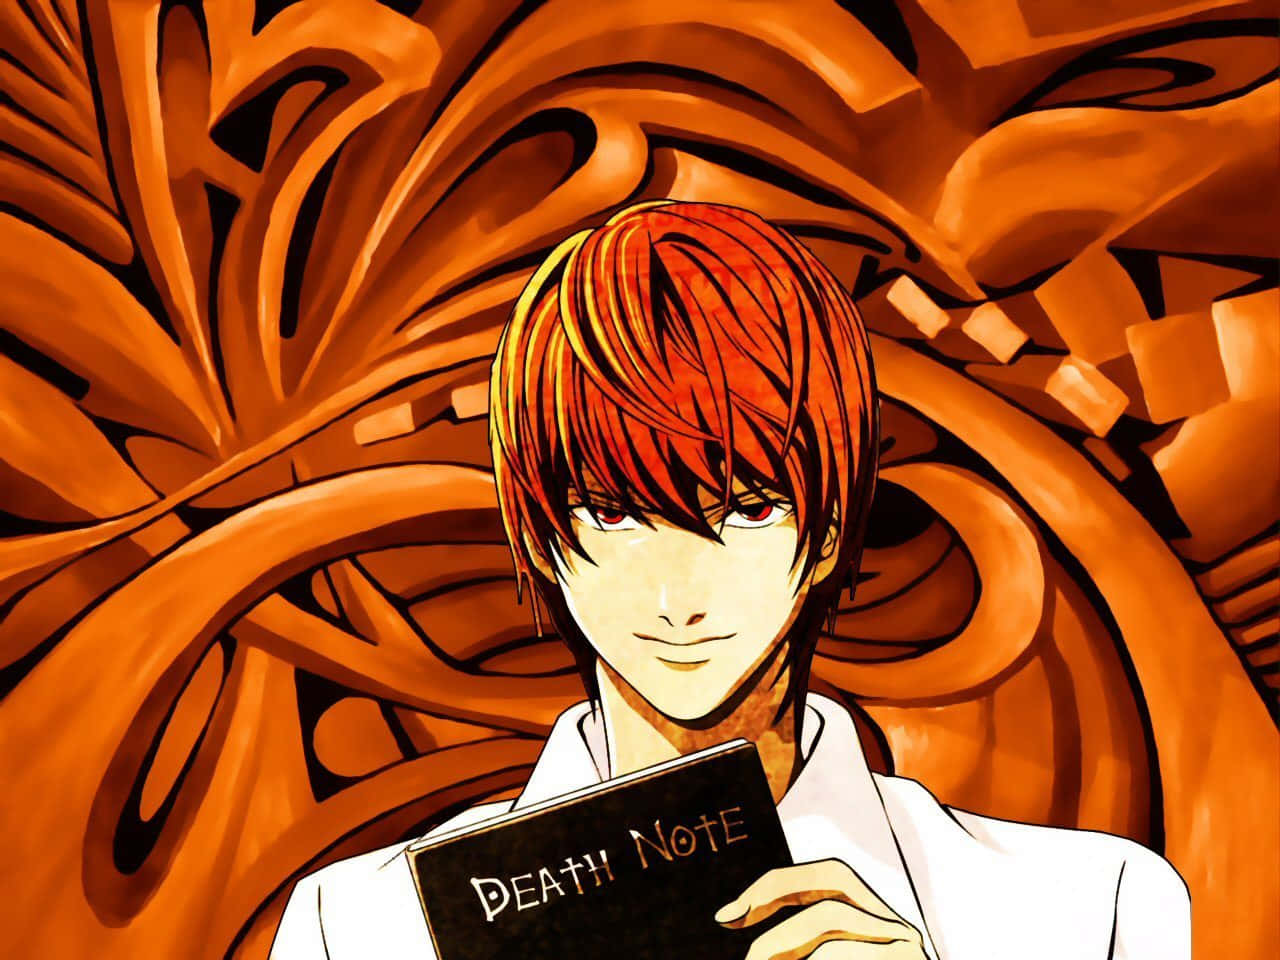 "The Death Note - A Tale of Justice and Power"